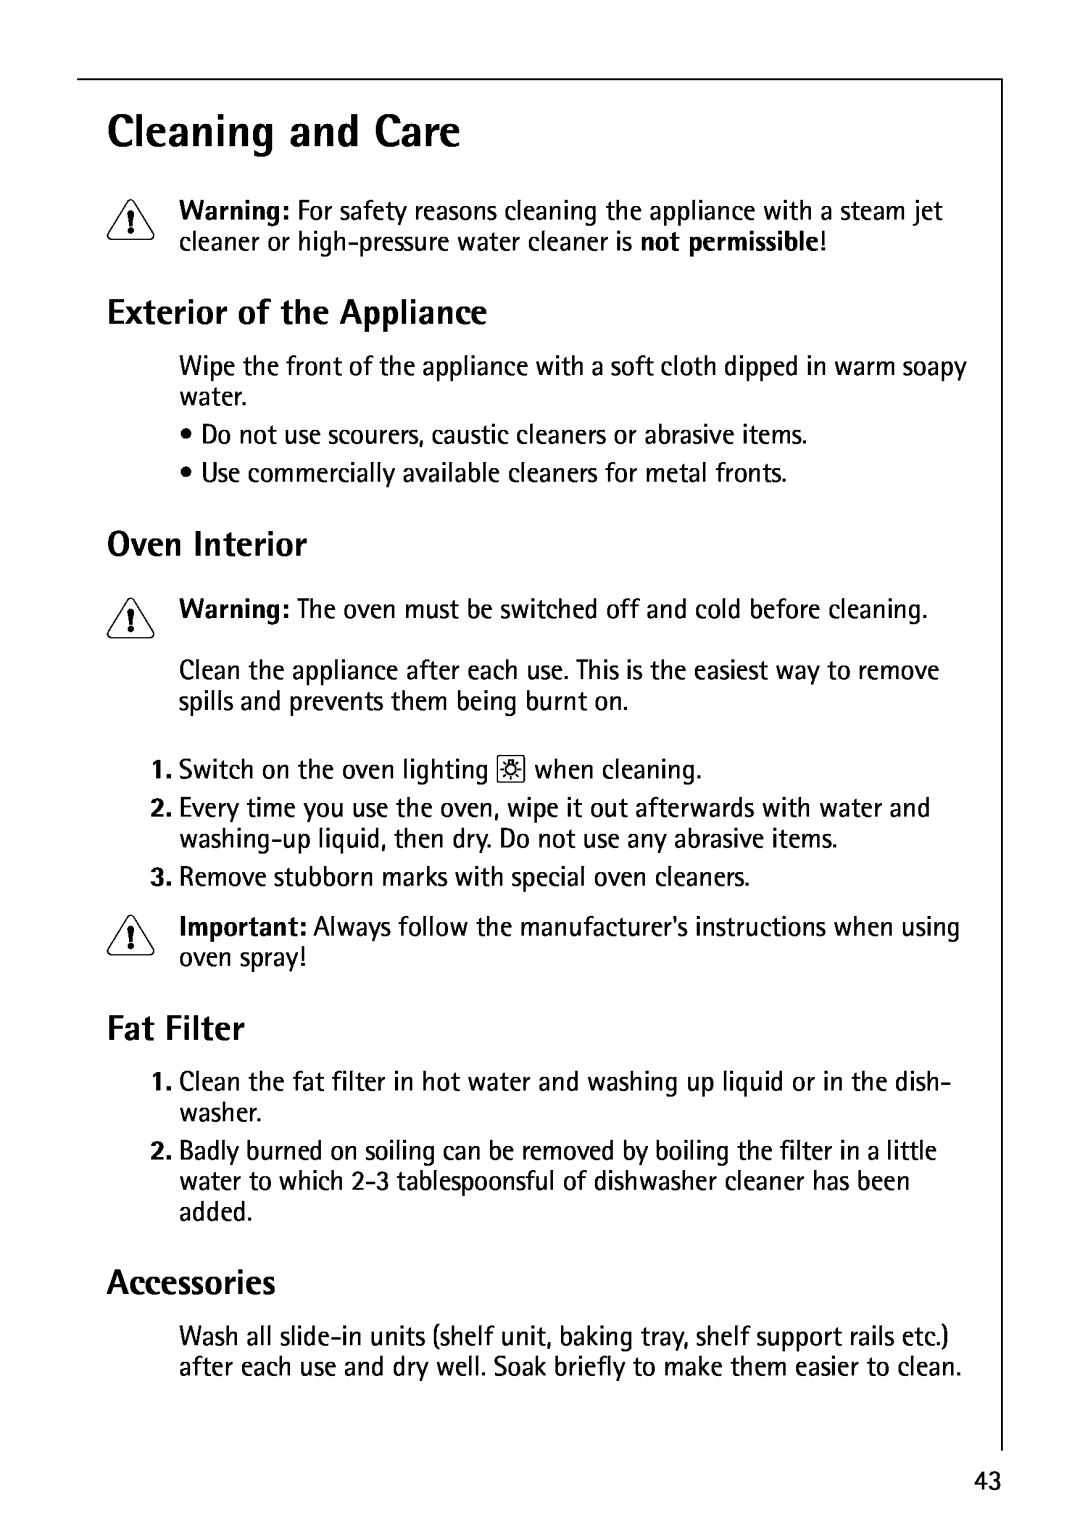 AEG B4130-1 operating instructions Cleaning and Care, Exterior of the Appliance, Oven Interior, Fat Filter, Accessories 